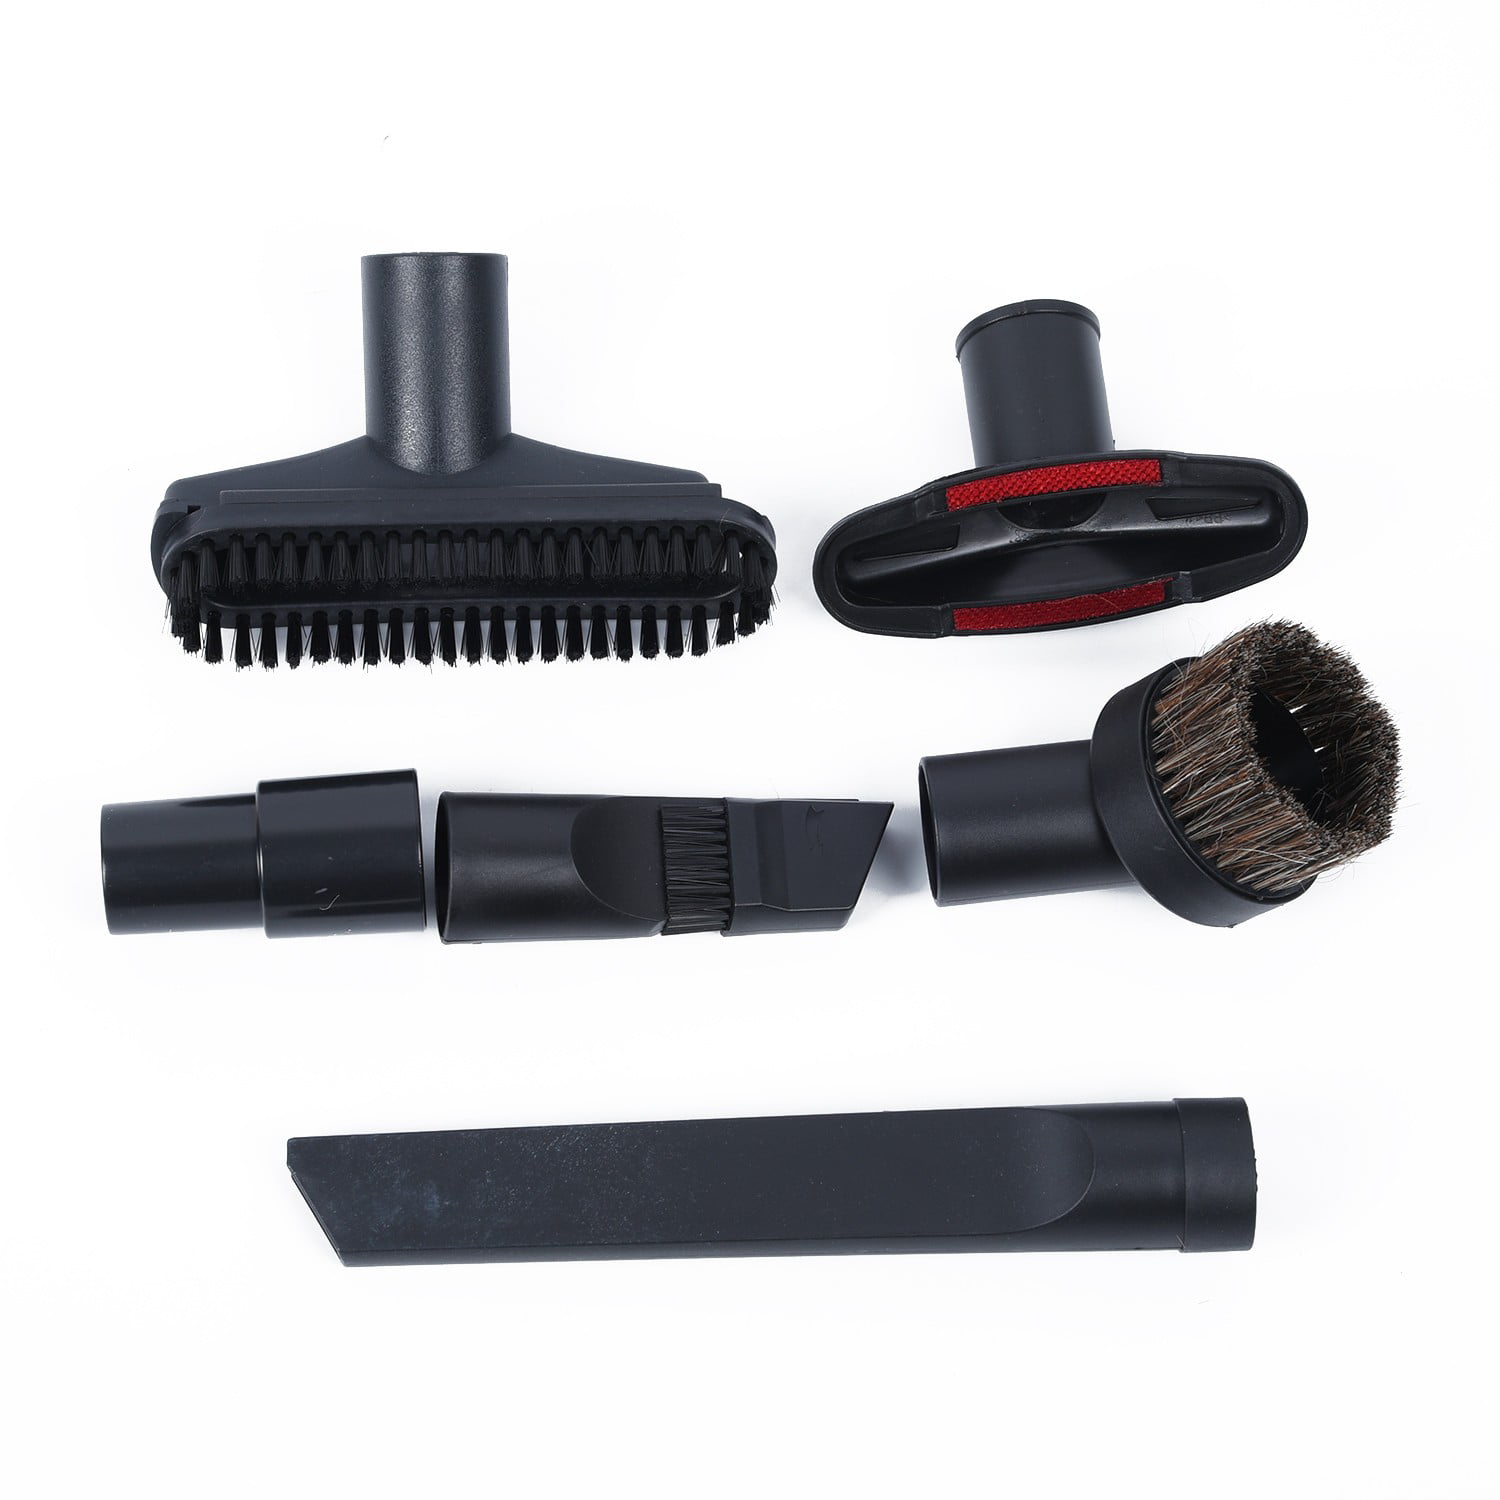 Soft Dusting Brush Cleaning Tool Kit for SAMSUNG Vacuum Cleaner 35mm 